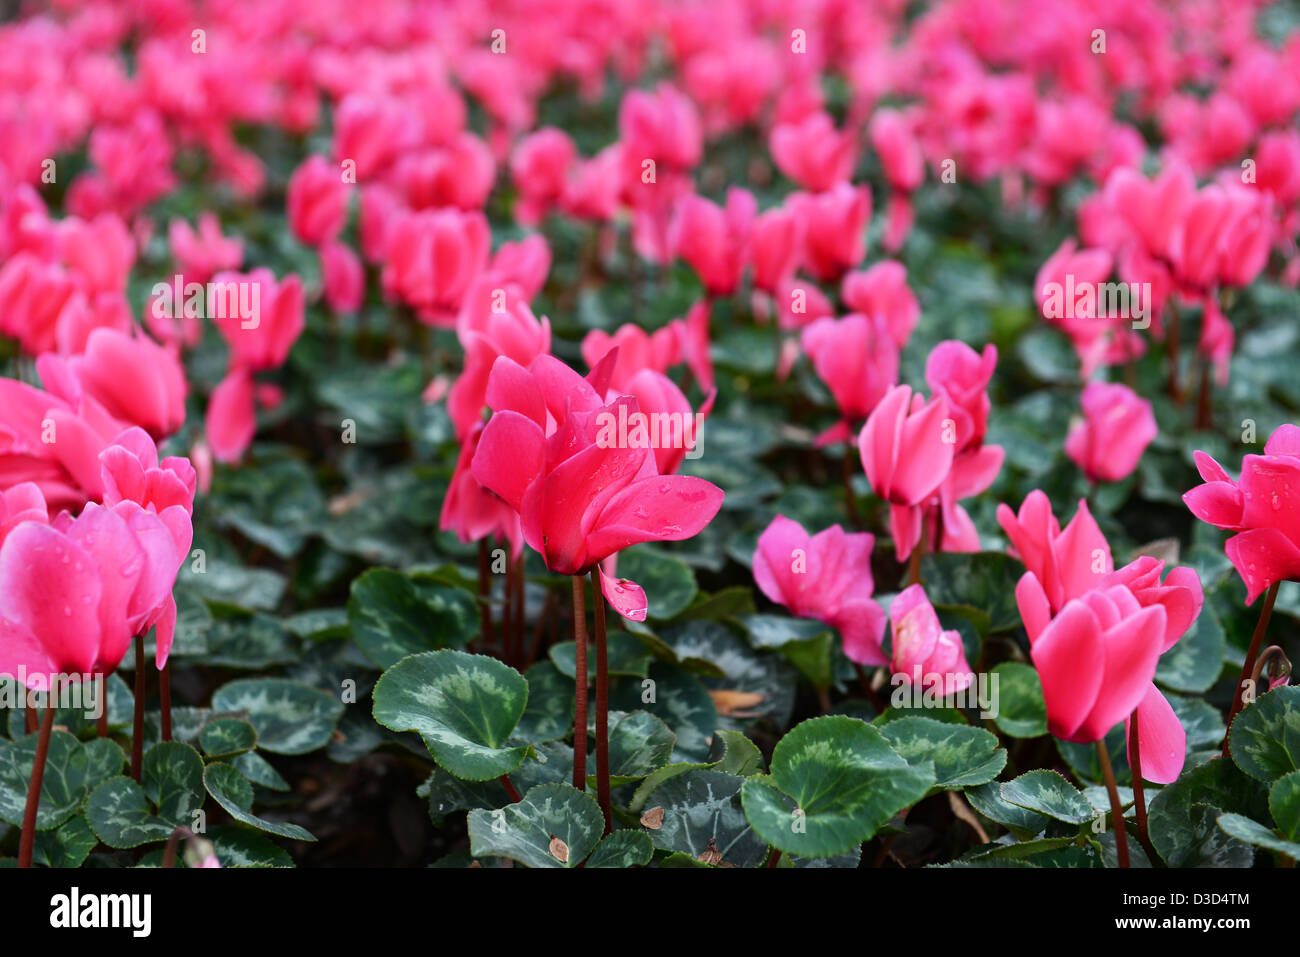 Pink Bed Of Zen Flowers Covered With Water Drops Stock Photo